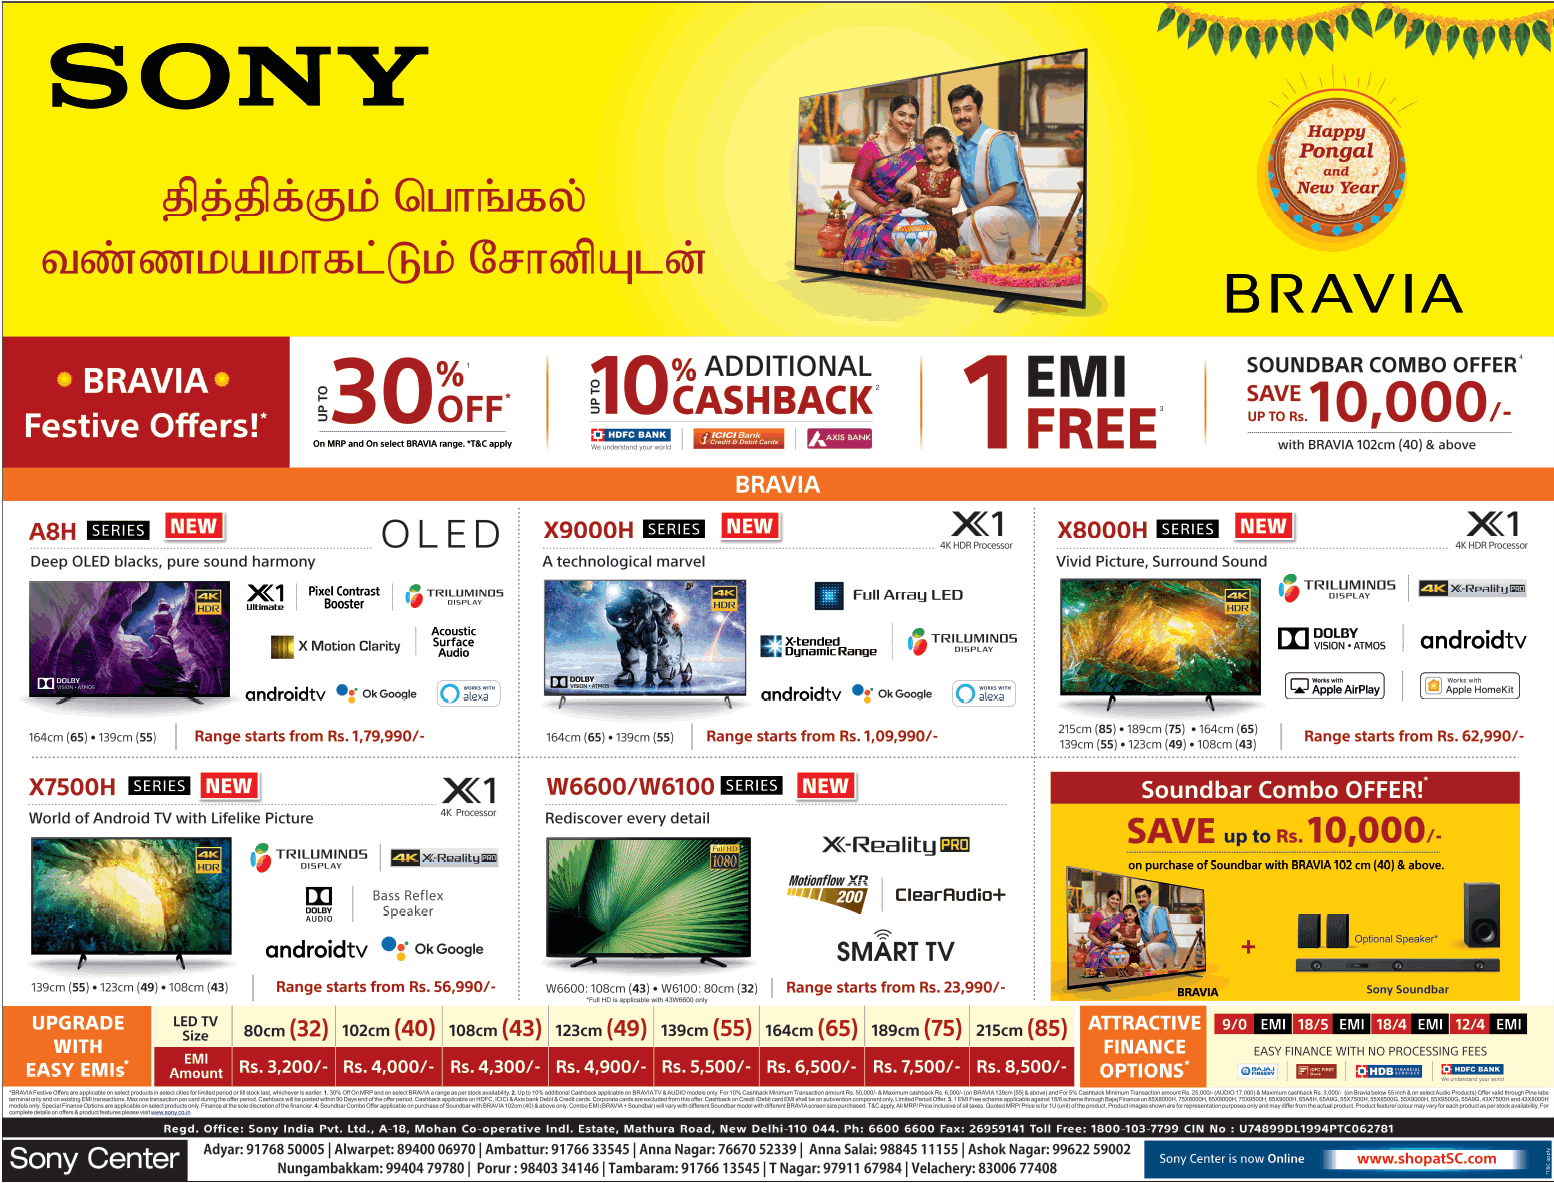 sony-bravia-festival-offers-up-to-30%-off-up-to-10%-additional-cashback-ad-chennai-times-02-01-2021